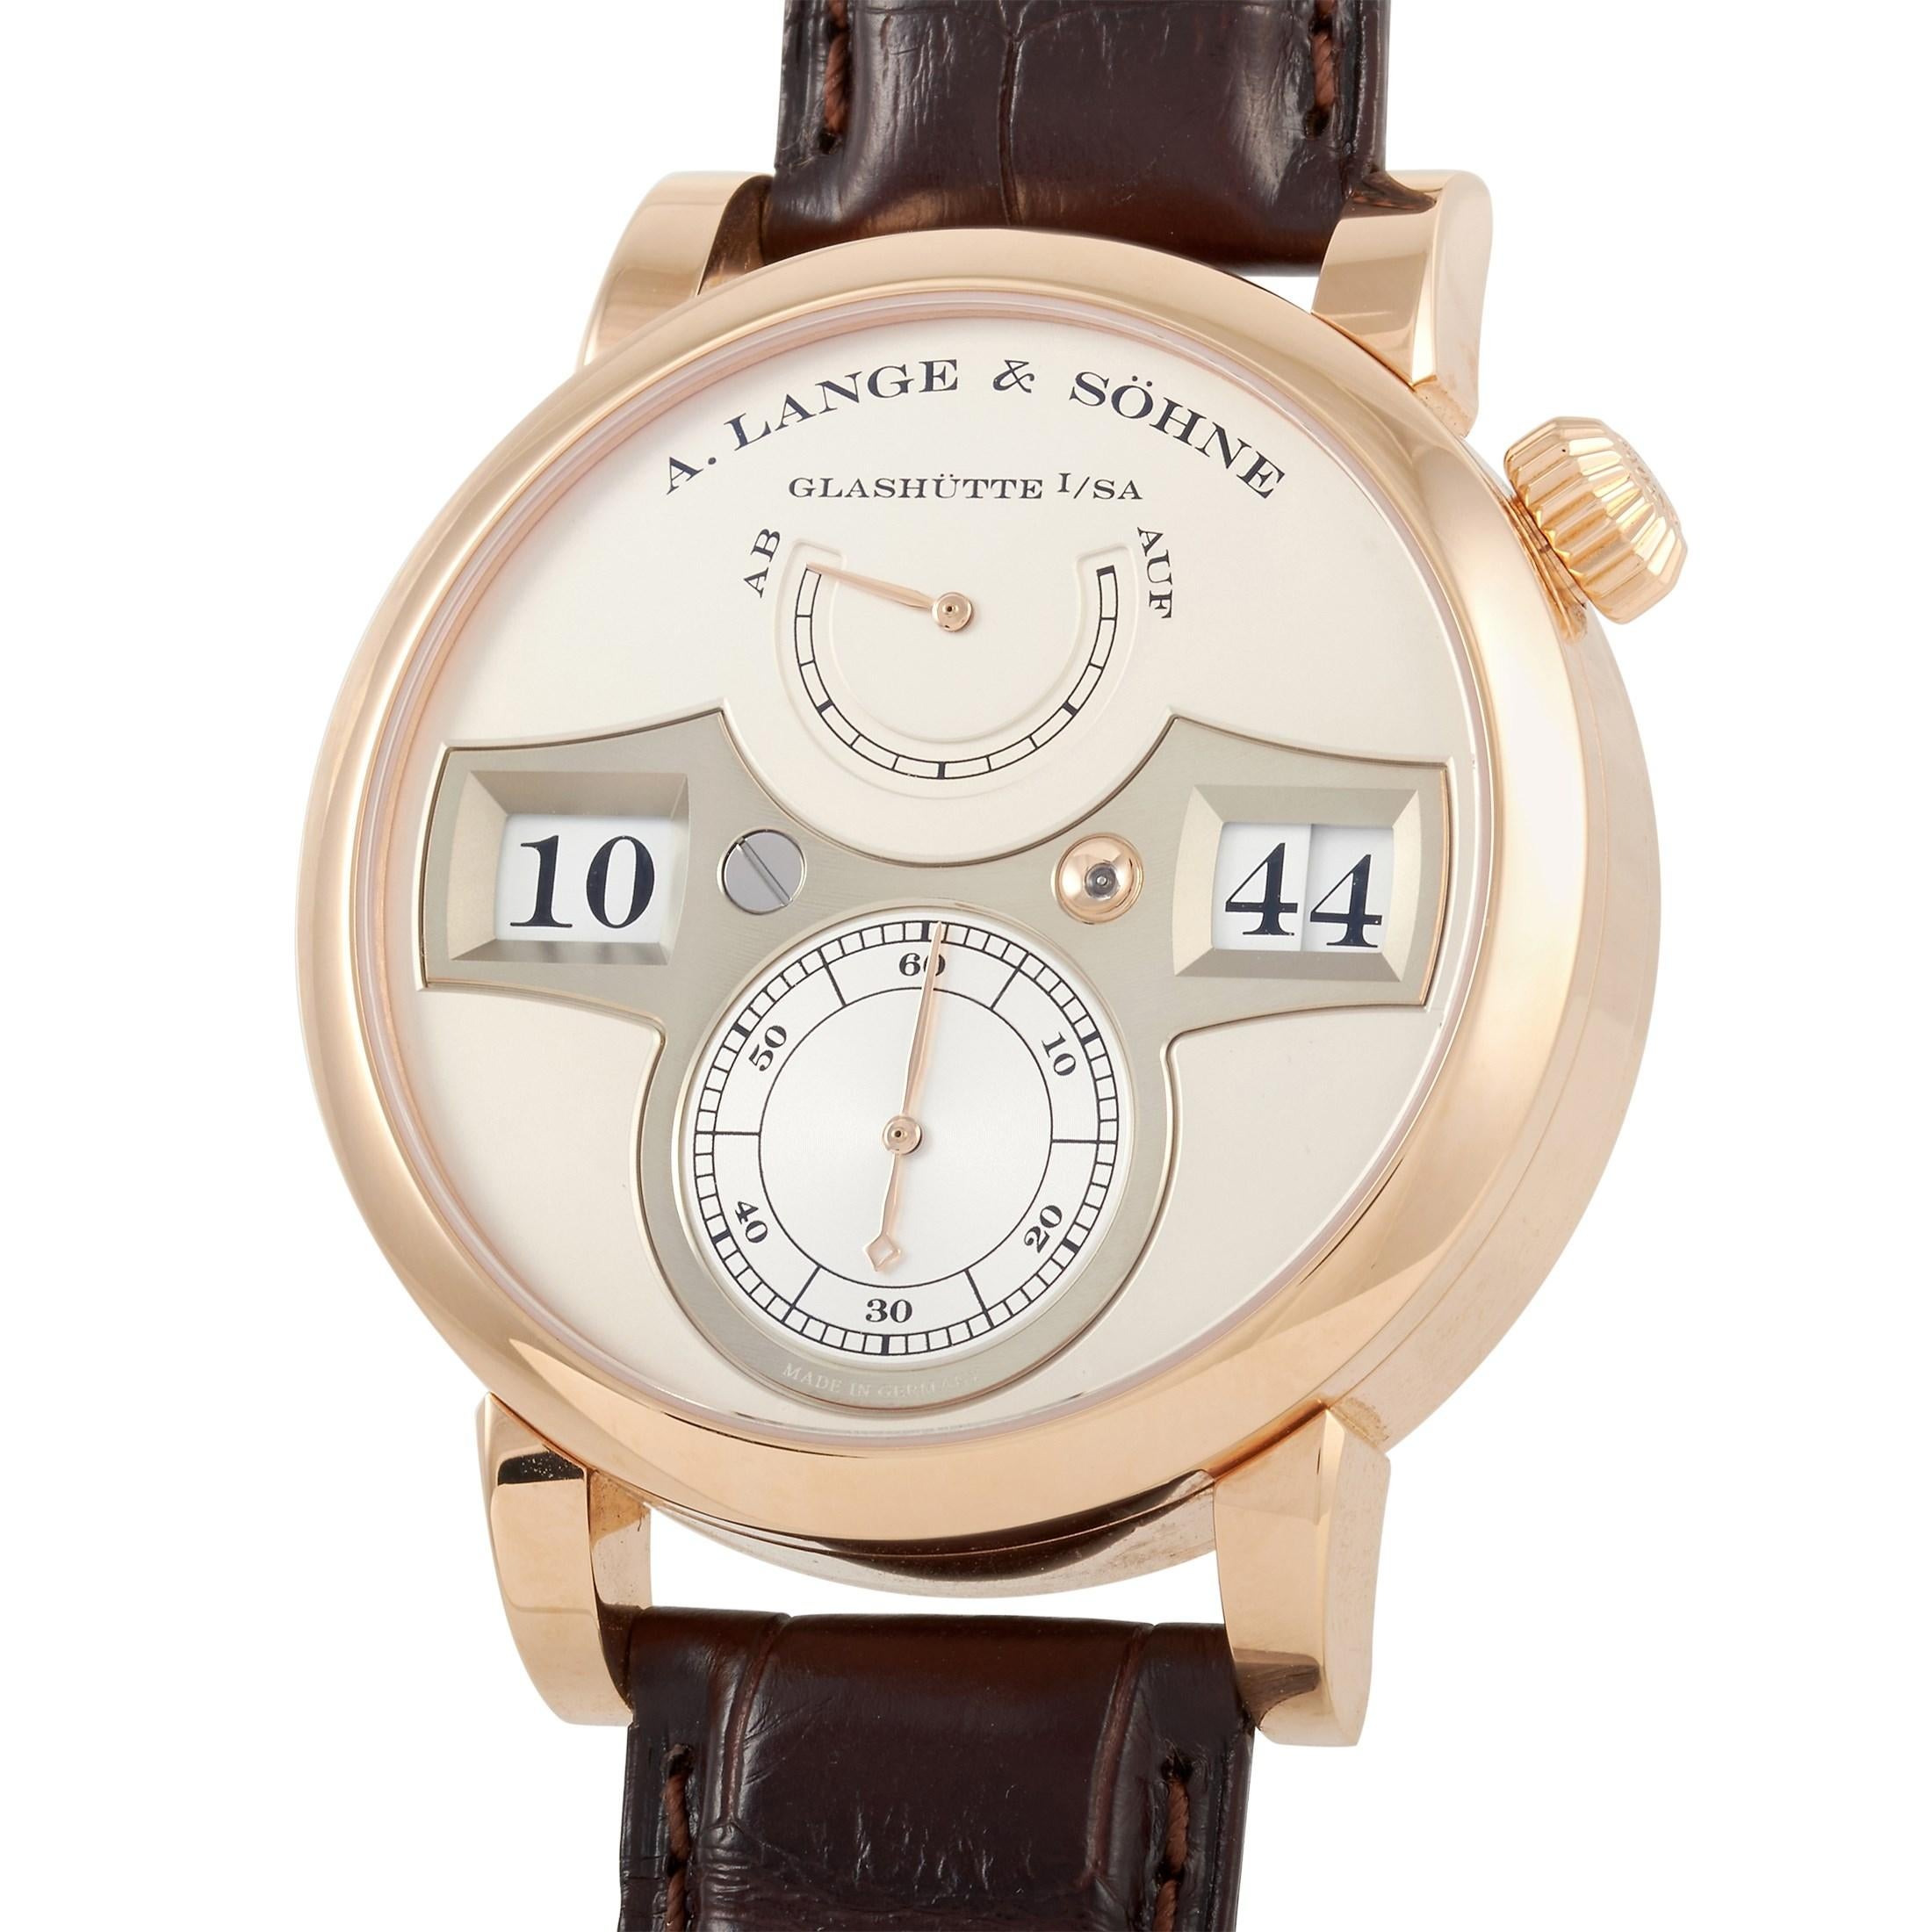 This A. Lange & Sohne Zeitwerk 41.9 mm 18K Rose Gold Watch, reference number 140.032, comes with an 18K rose gold case that measures 41.9 mm in diameter. The case is presented on a deep brown alligator leather strap with tang closure. The open case